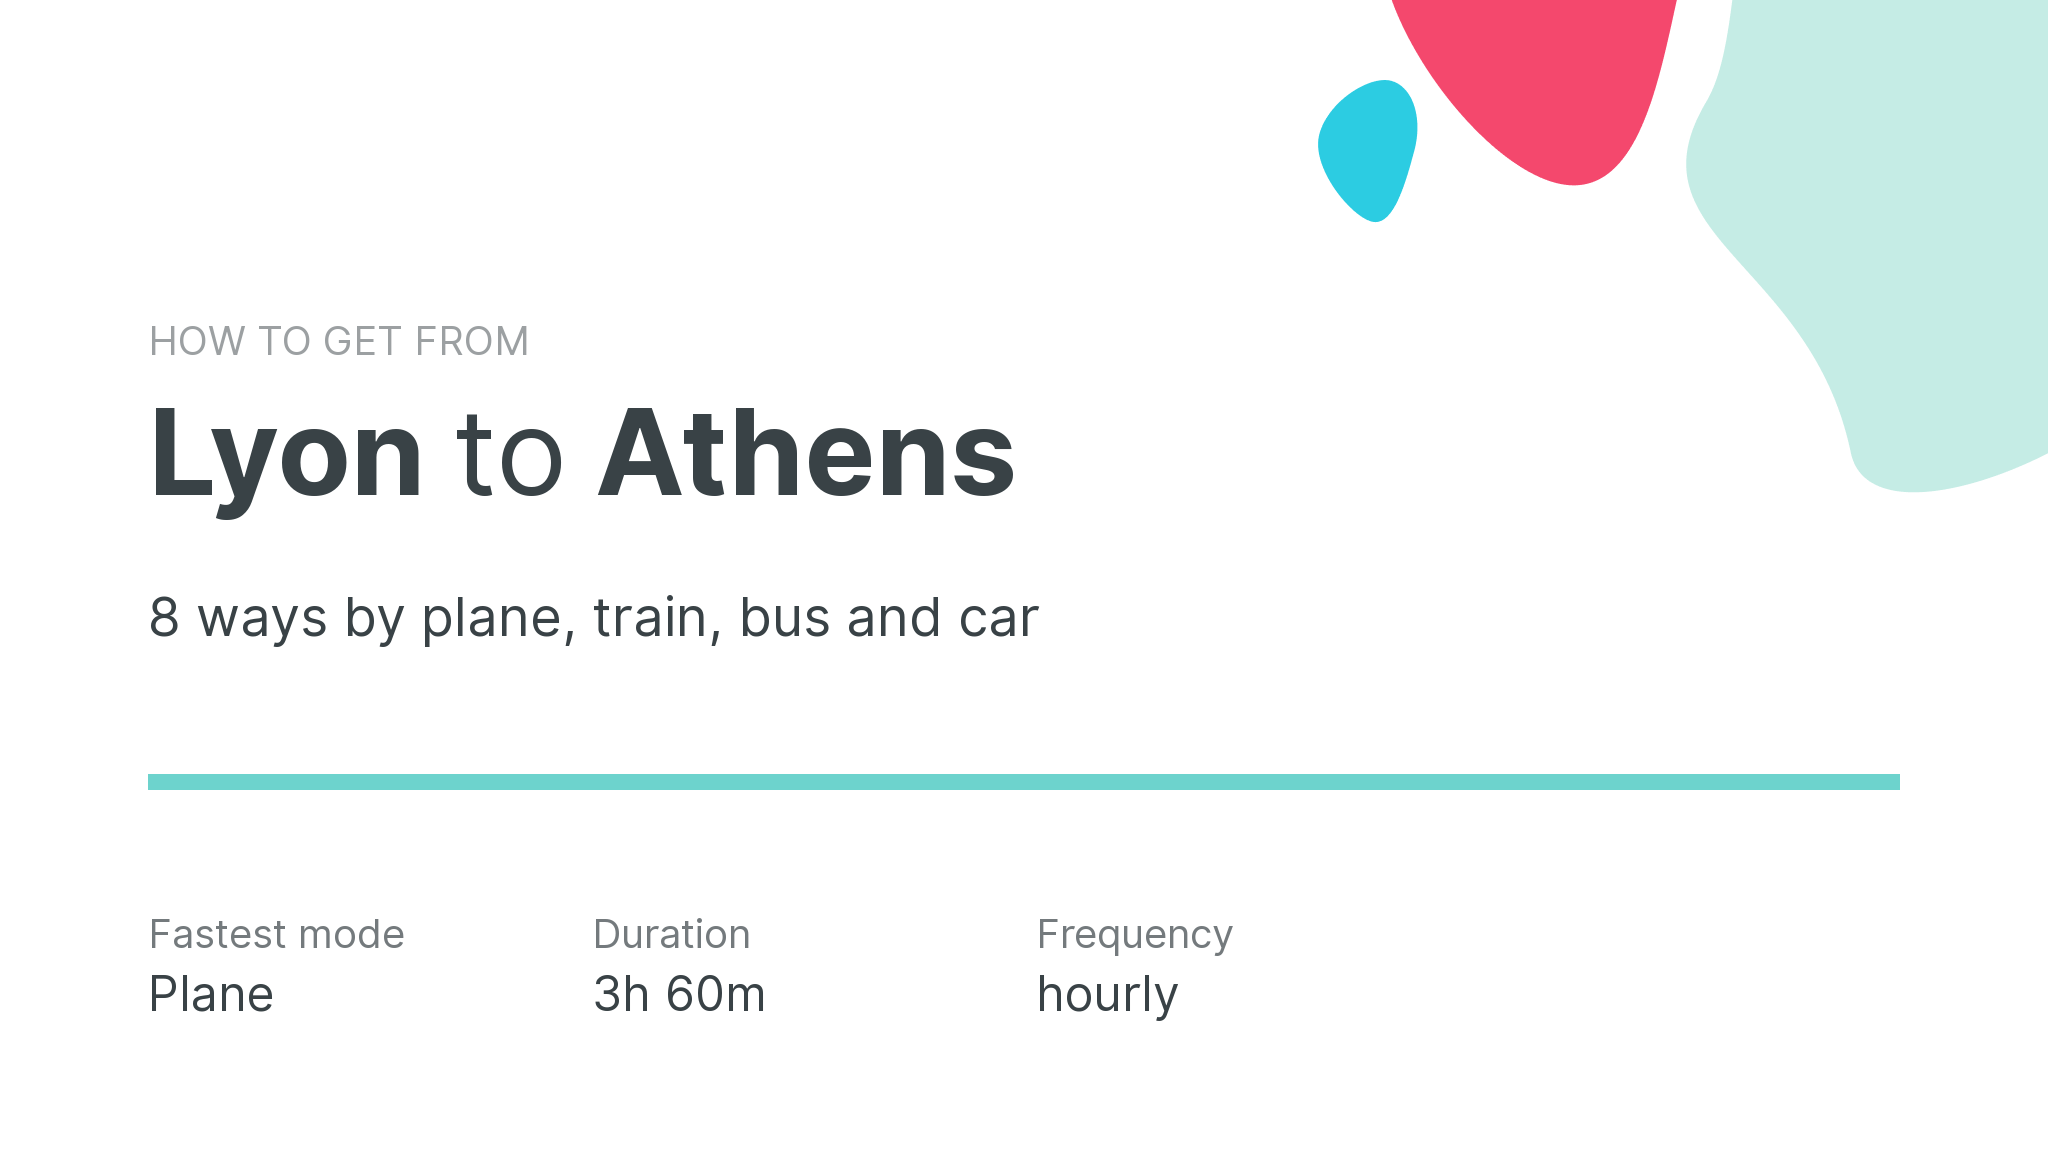 How do I get from Lyon to Athens